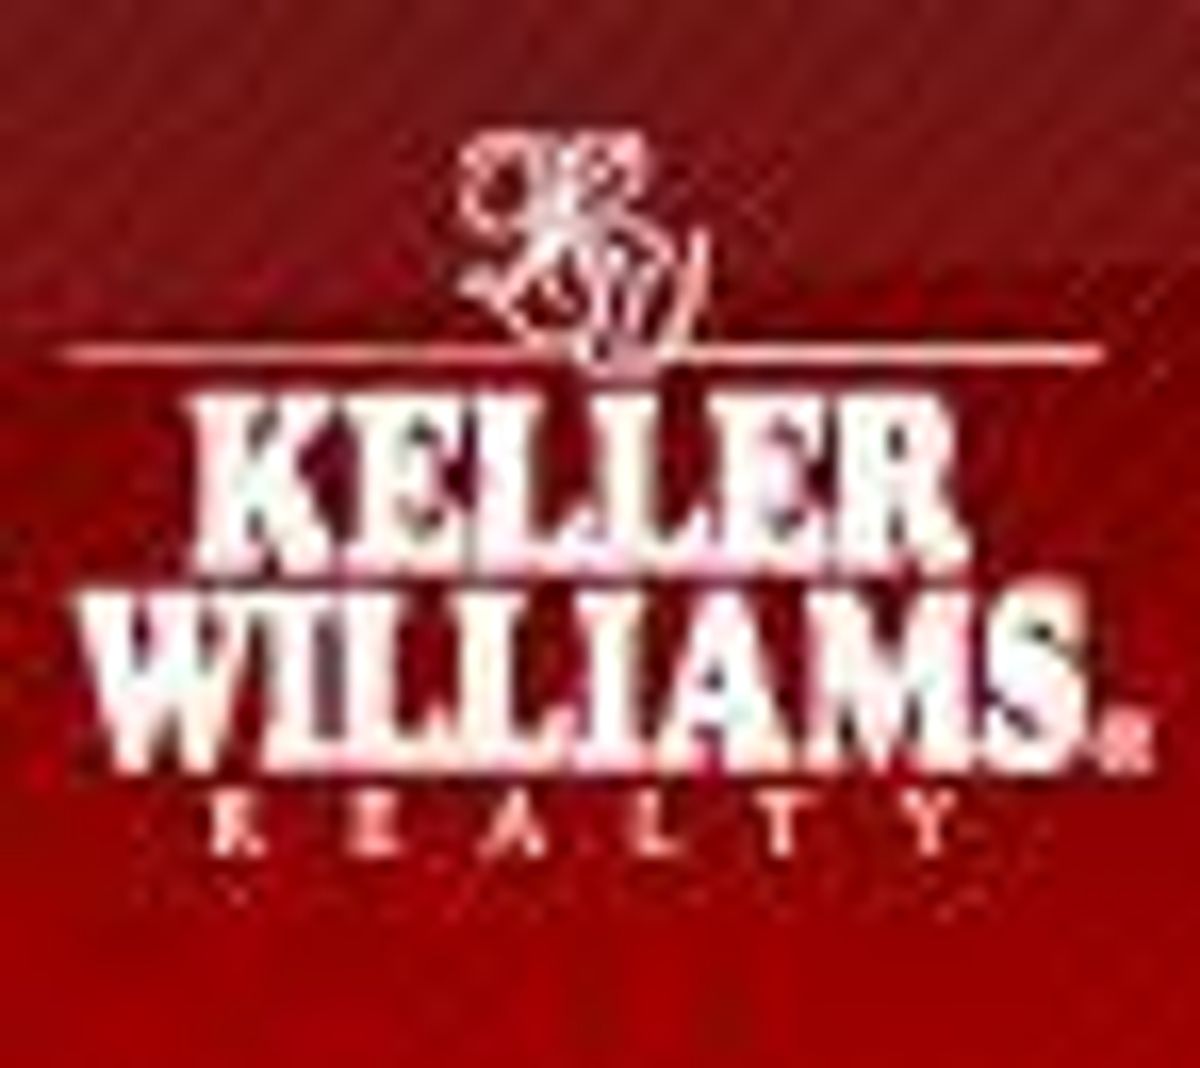 Photo for Michele Waters, Listing Agent at KELLER WILLIAMS REALTY SMART